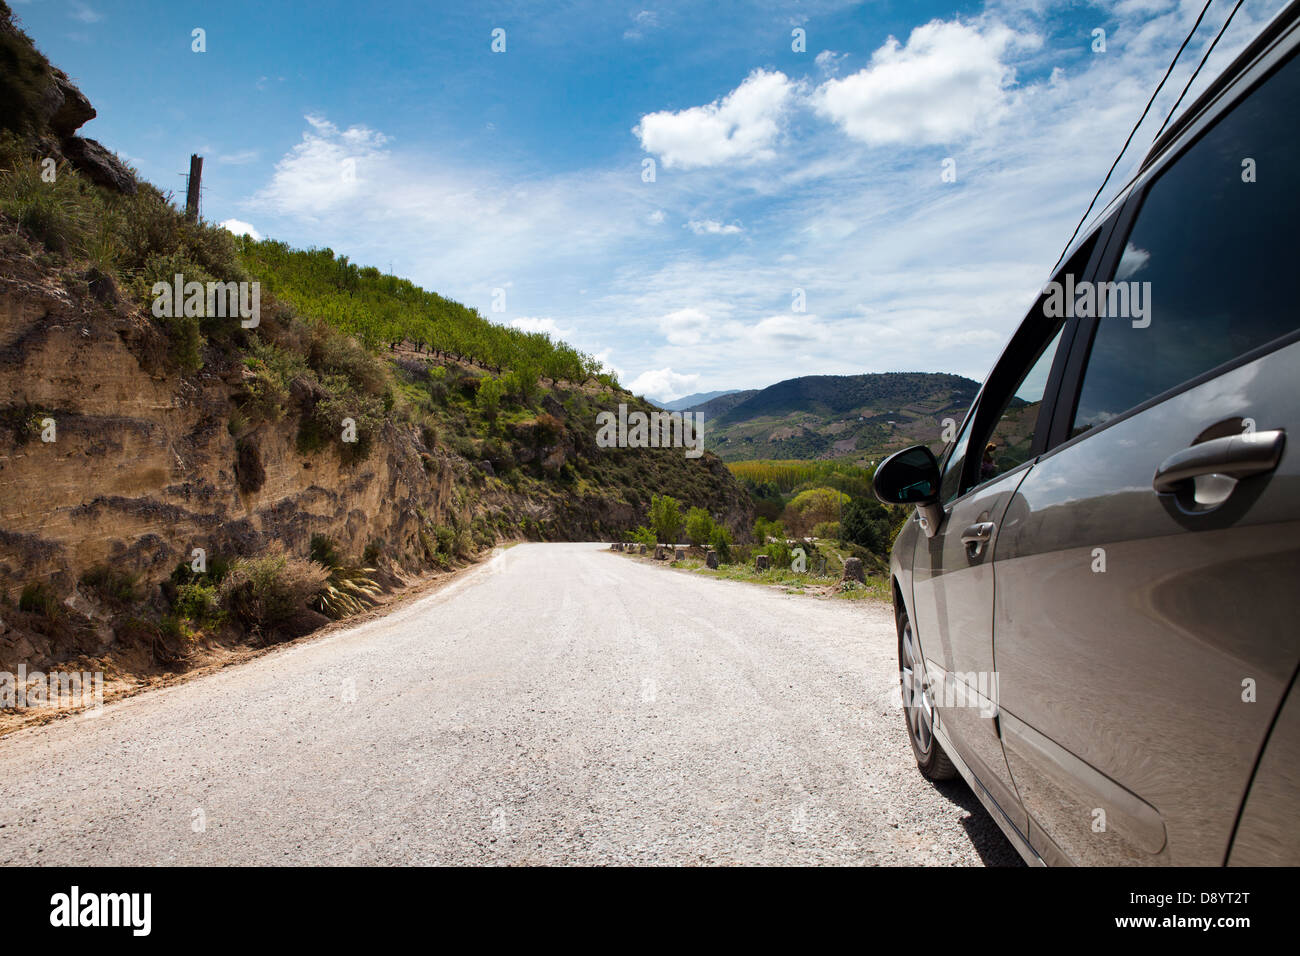 Travel by car - curvy road and beautiful landscape ahead Stock Photo